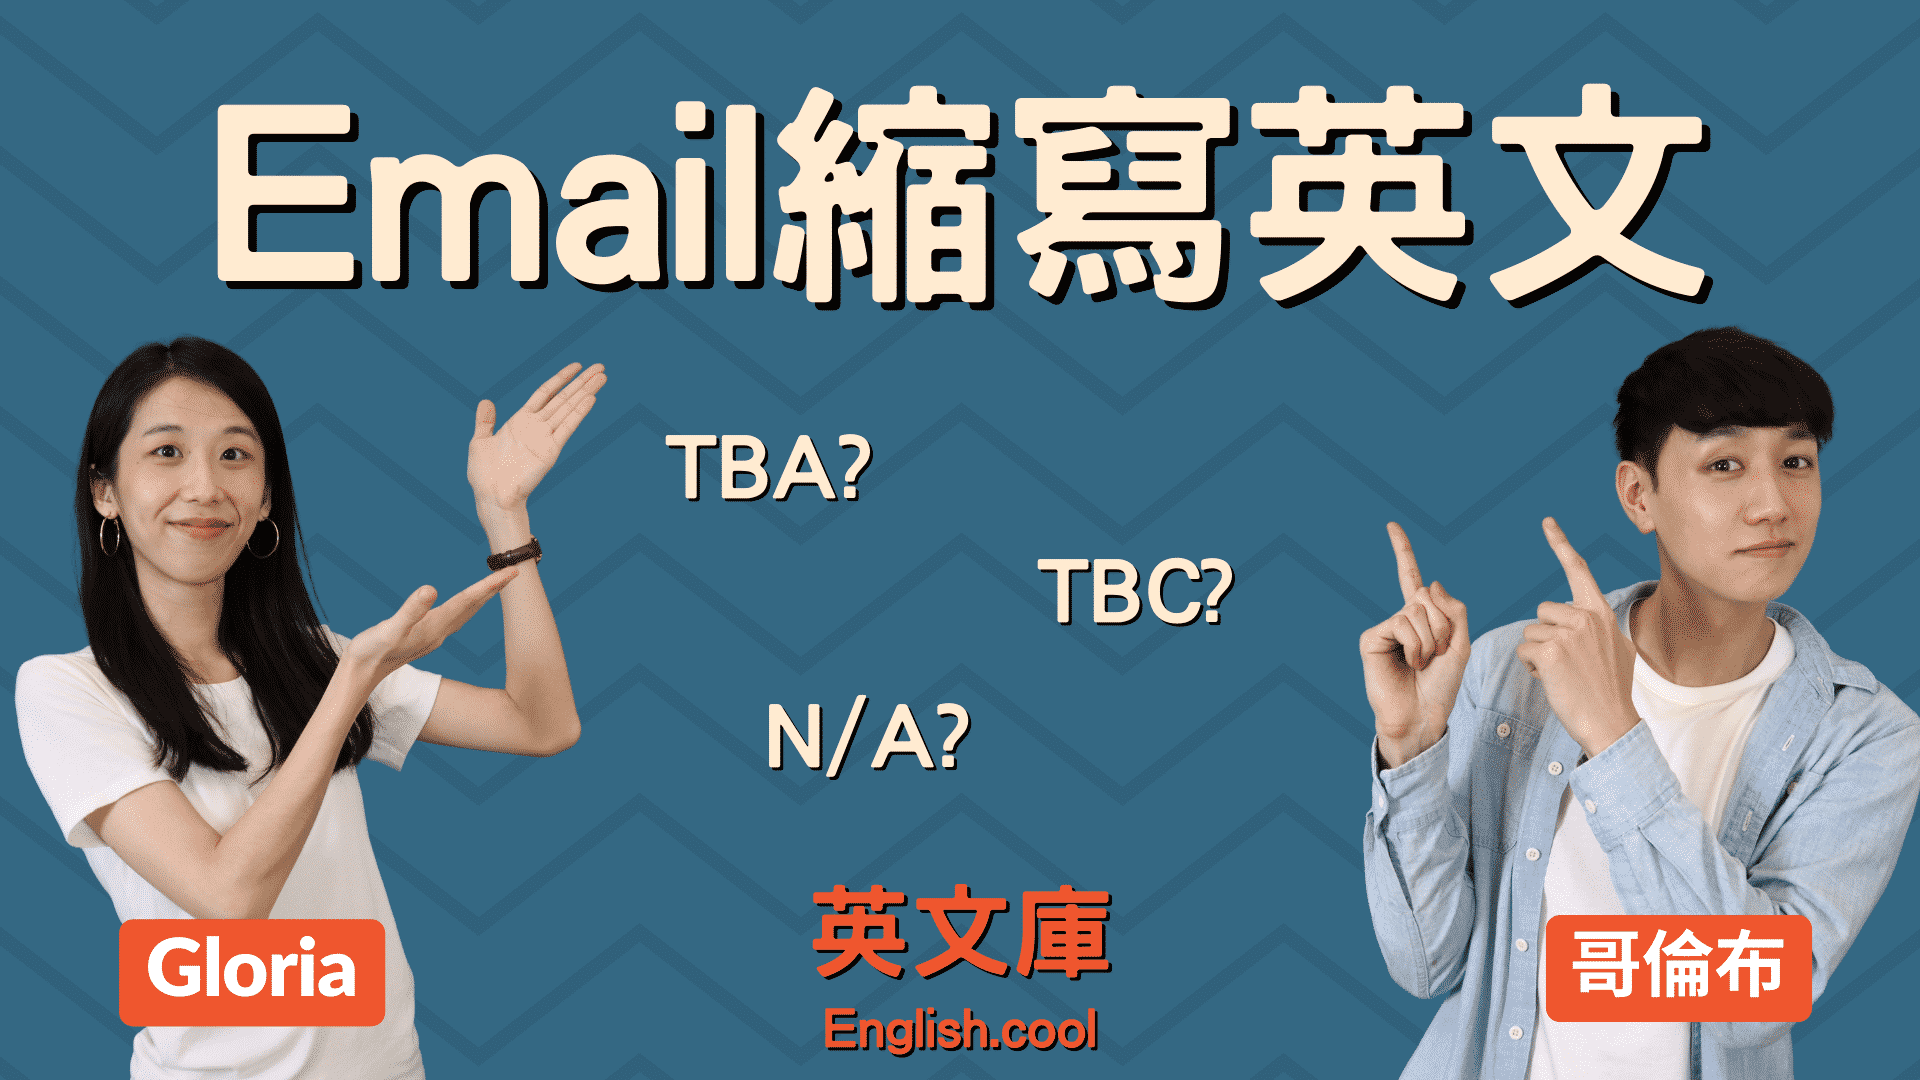 You are currently viewing 【Email英文】信件裡的 TBA, TBC, N/A 是什麼意思？